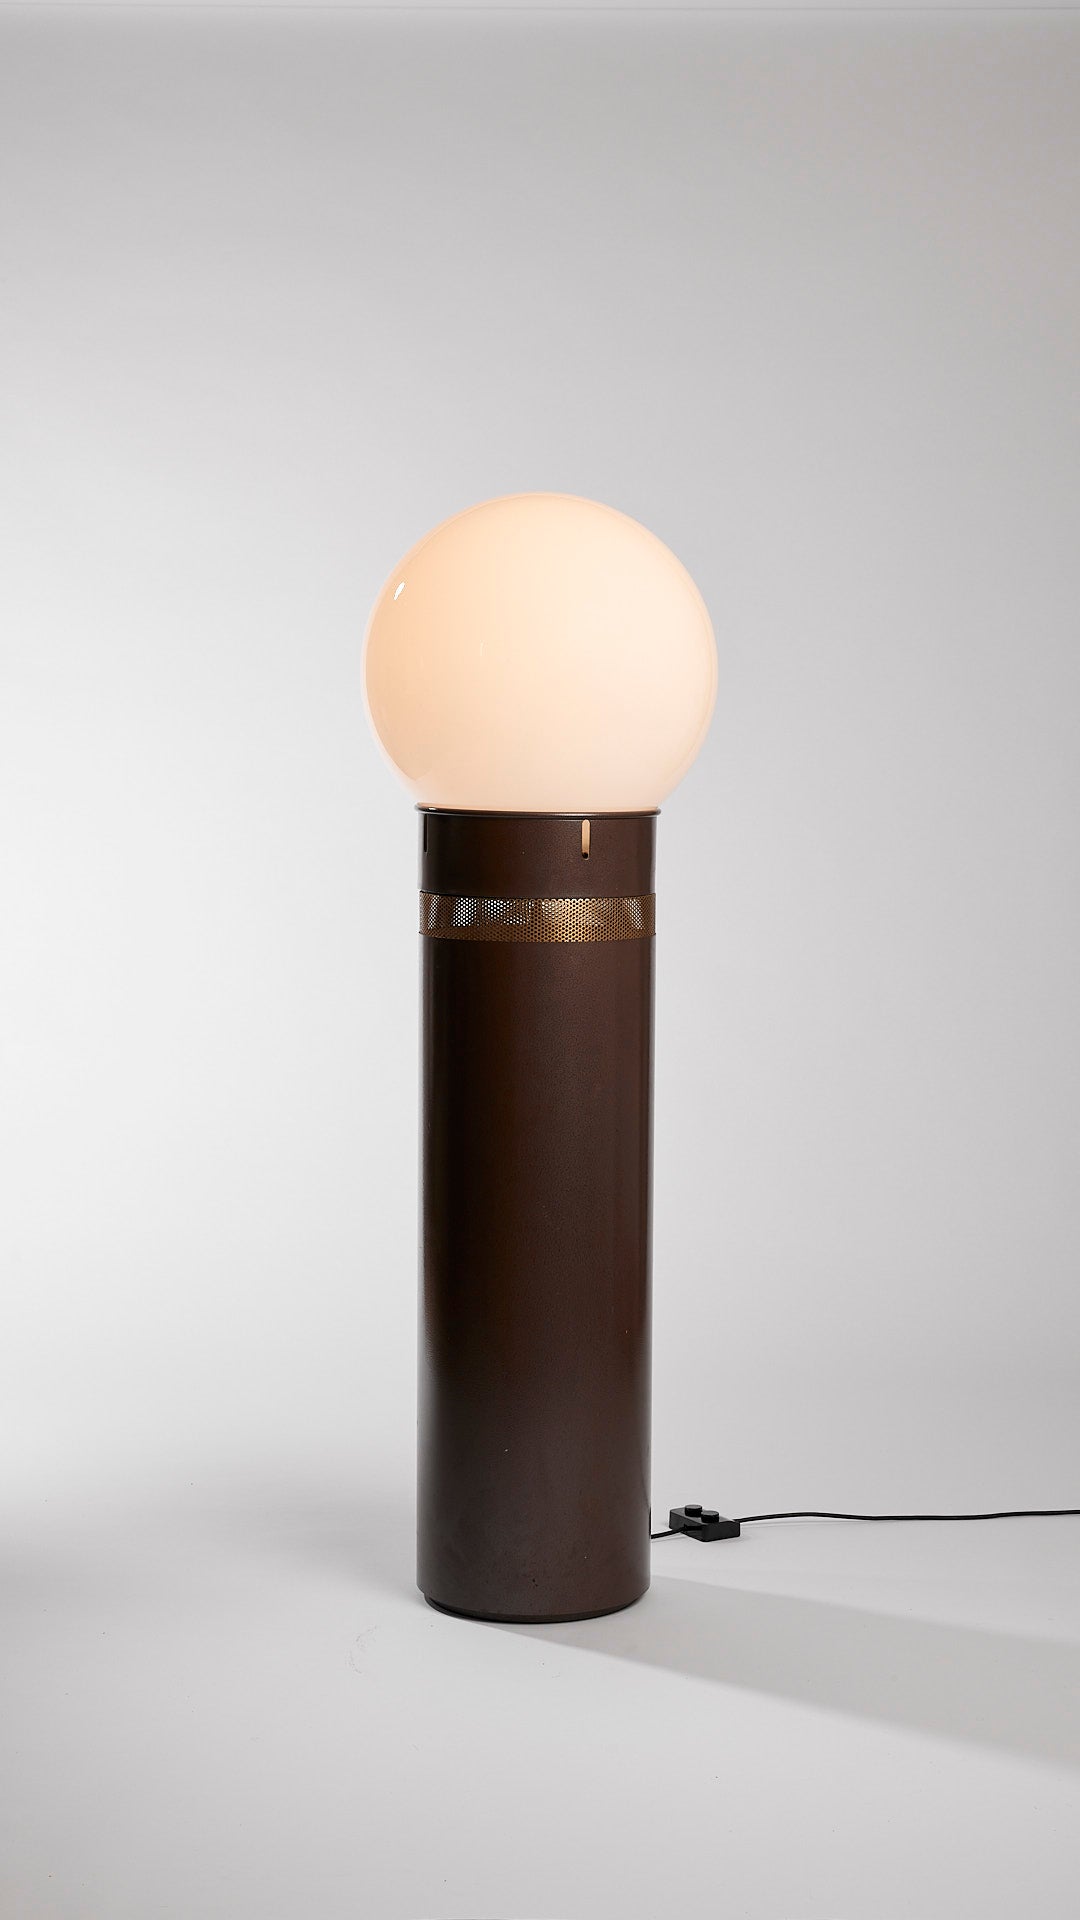 GAE AULENTI (1927-2012)
Oracolo, c. 1969
Artemide
Shaft in brown lacquered metal and white opaline globe
Switch 3 times
Height : 140 cm - Diameter : 45 cm

Gae Aulenti is a fabulous designer who notably signed the interior design of the Musée